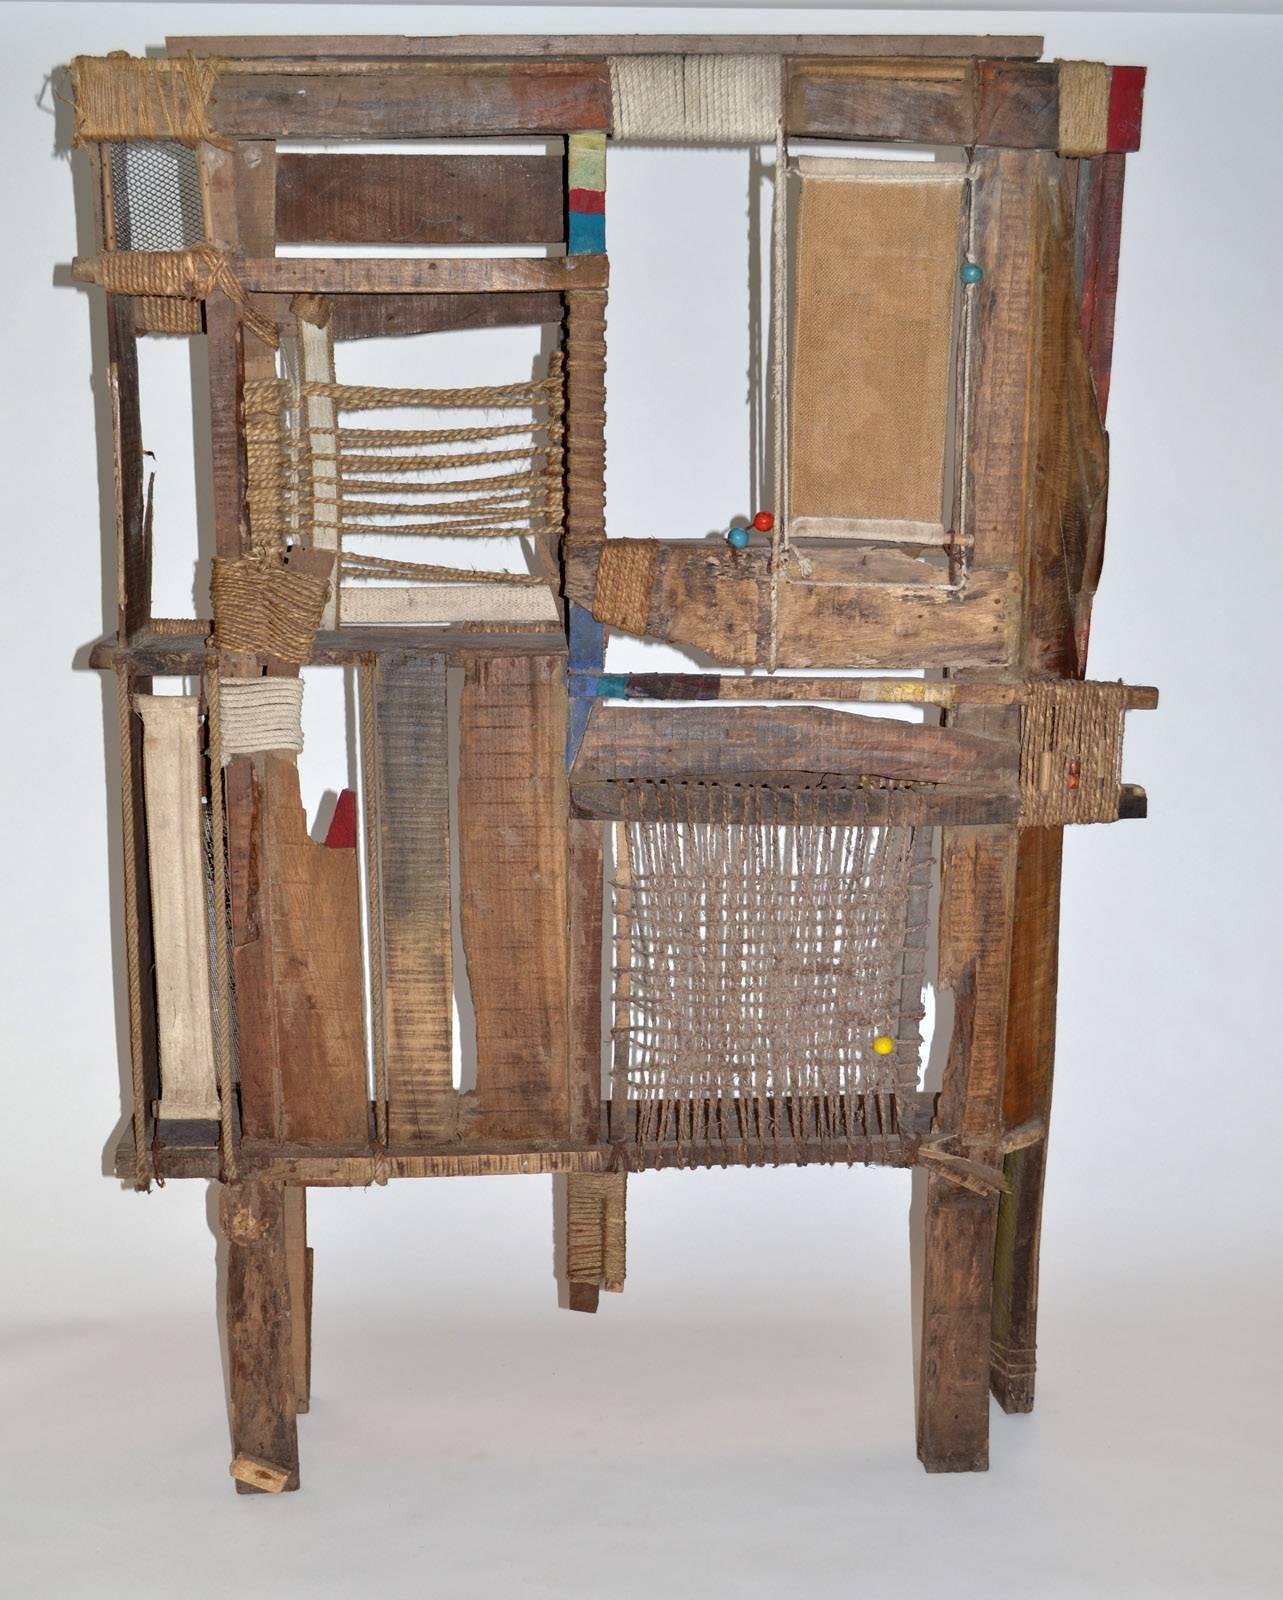 Folk Art outsider screen room divider reclaimed studio Indian modern one-off design by Calcutta, India artisan P. Mohanta. Purchased from Calcutta gallery comprised of found objects, weathered and reclaimed wood, rope, metals and assorted baubles. A